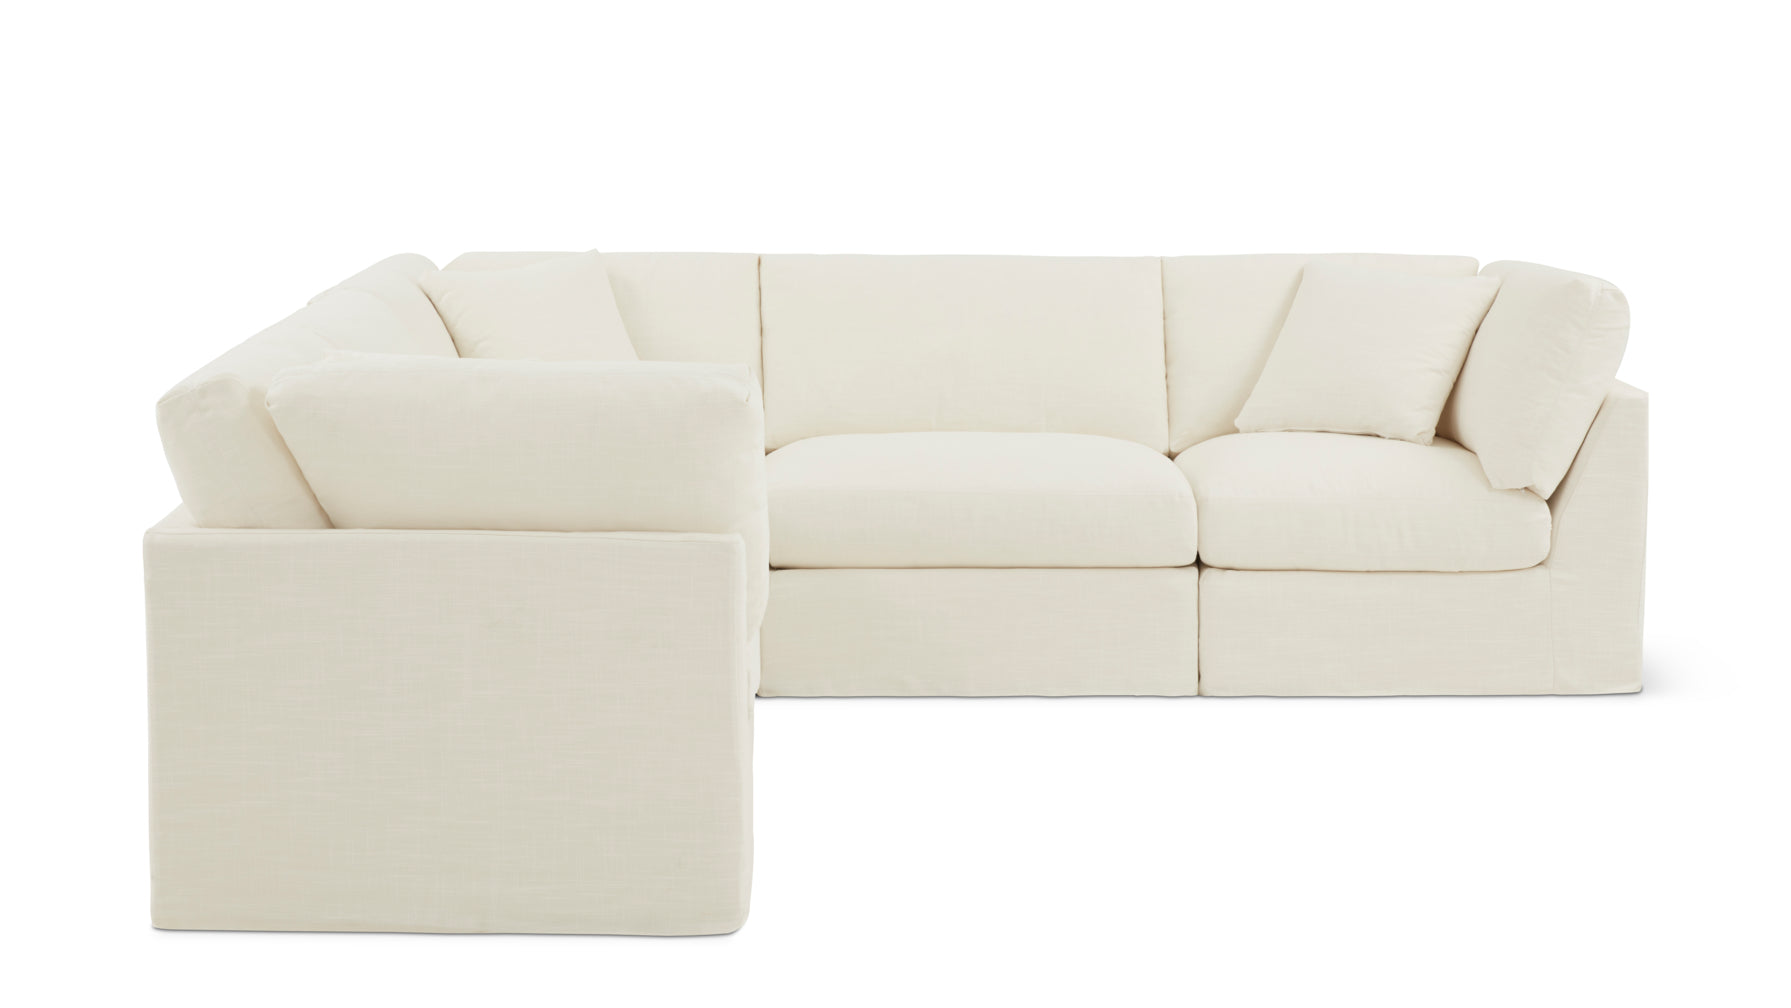 Get Together™ 5-Piece Modular Sectional Closed, Standard, Cream Linen - Image 2